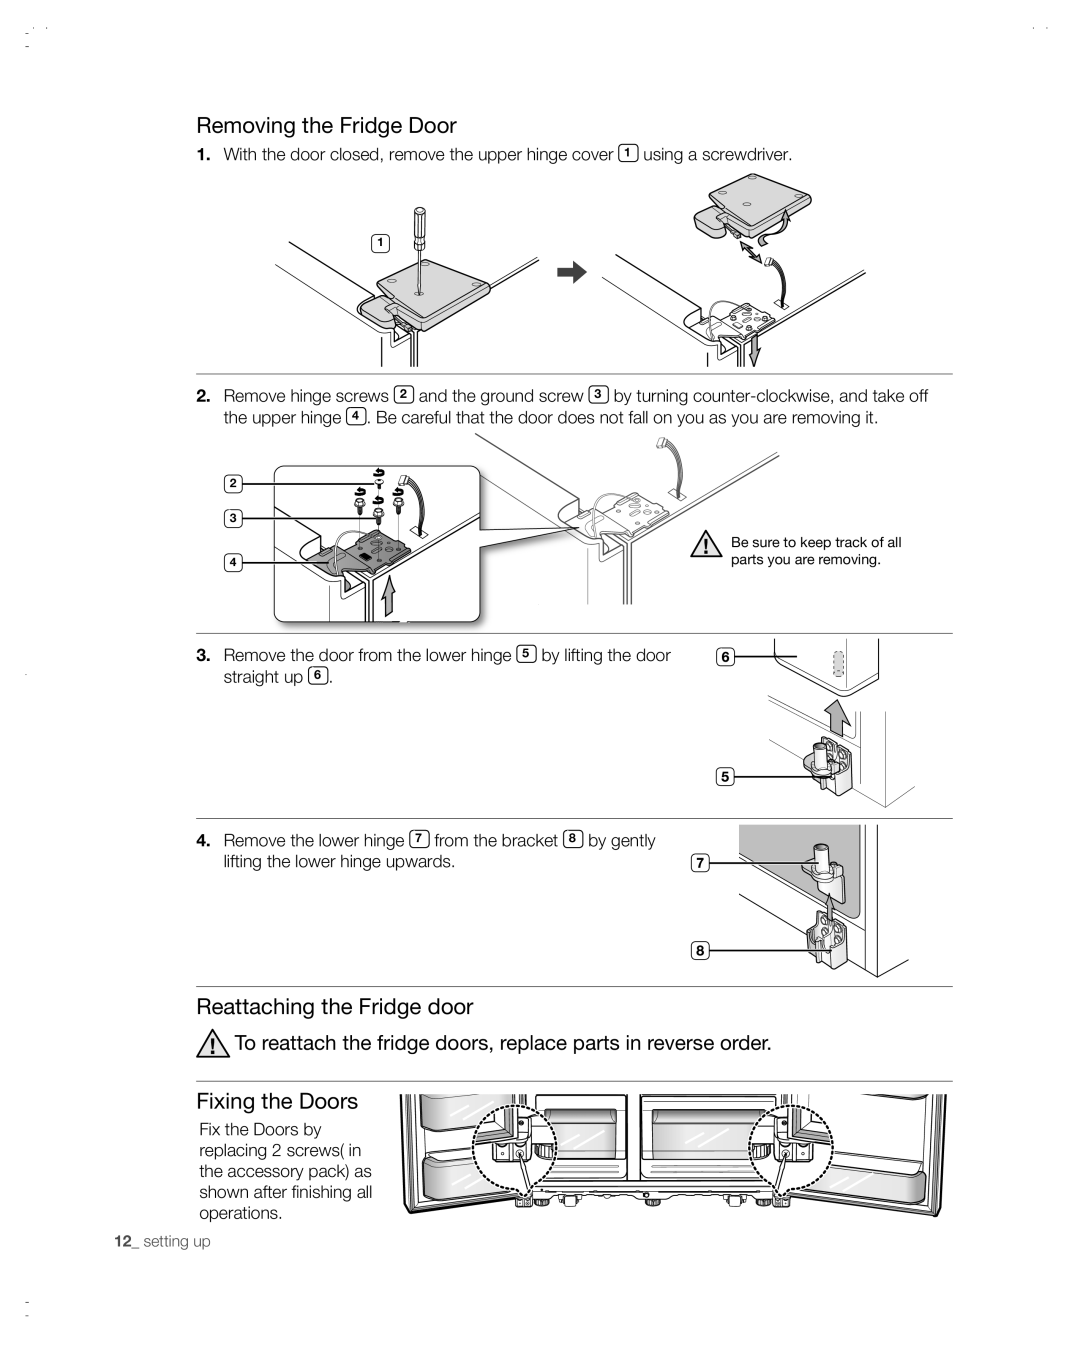 Samsung RSG257AABP user manual Removing the Fridge Door, Reattaching the Fridge door, Fixing the Doors 